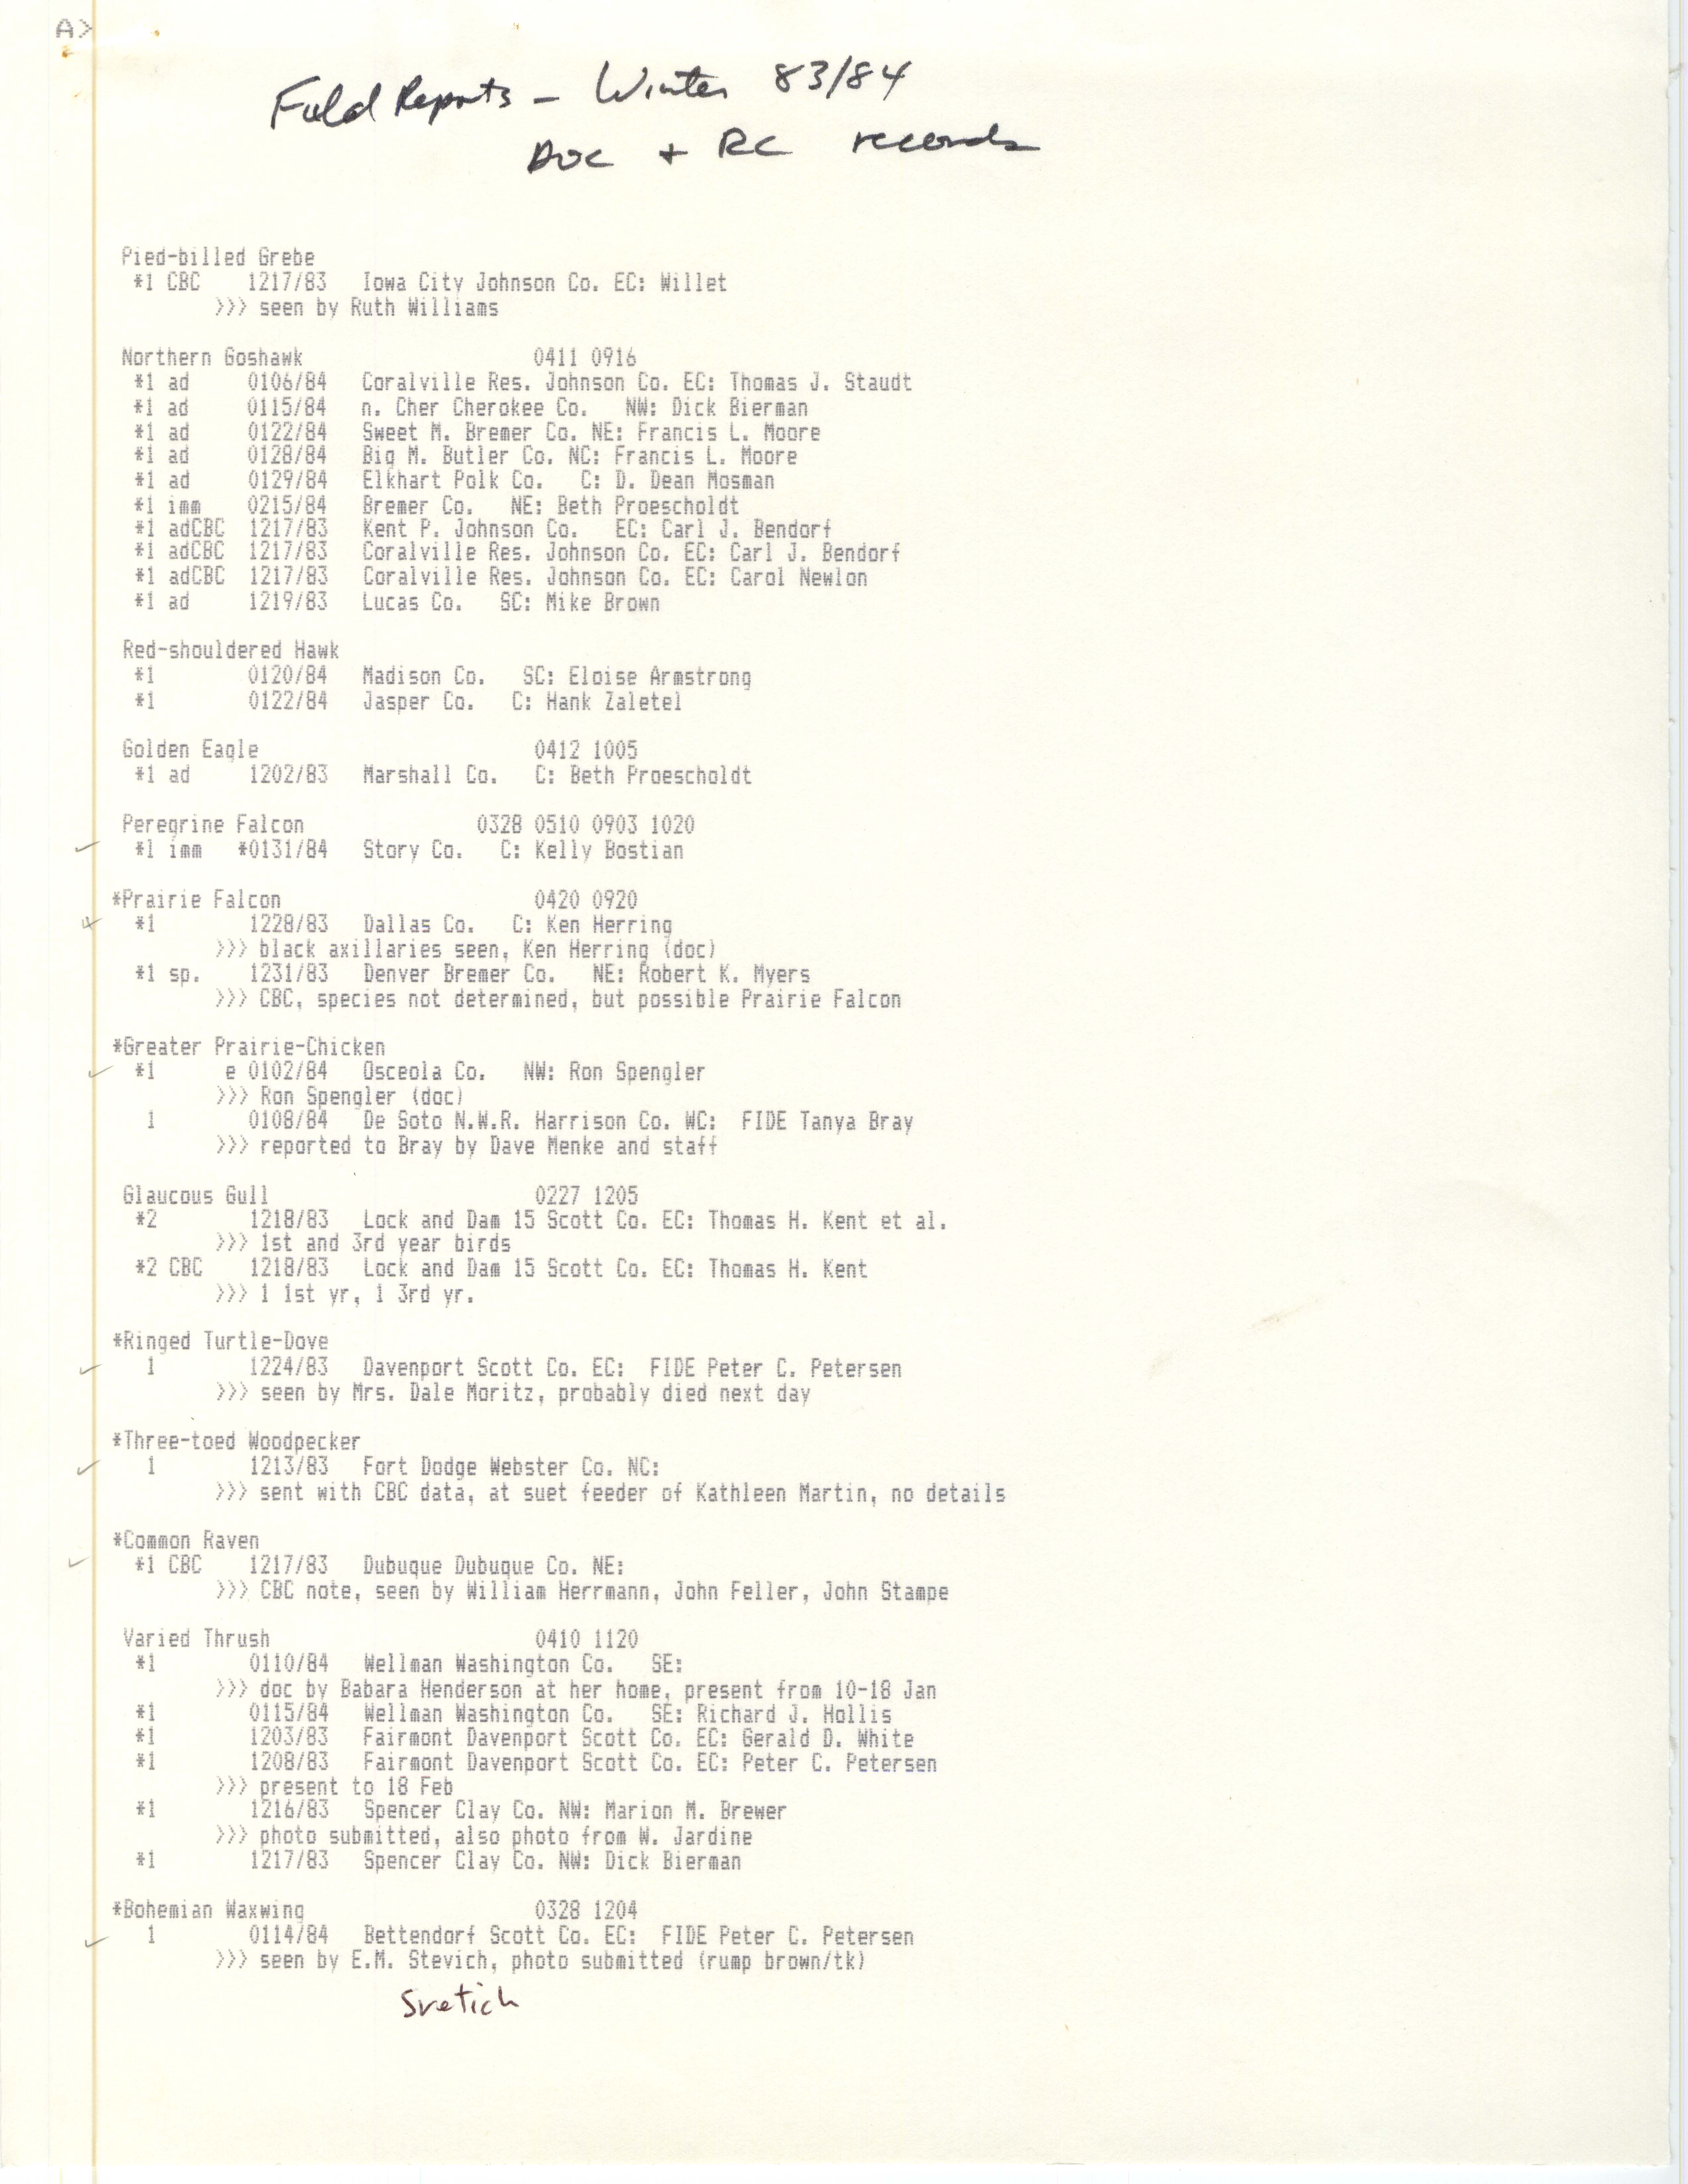 Field reports data, winter 1983-1984, DOC and RC records